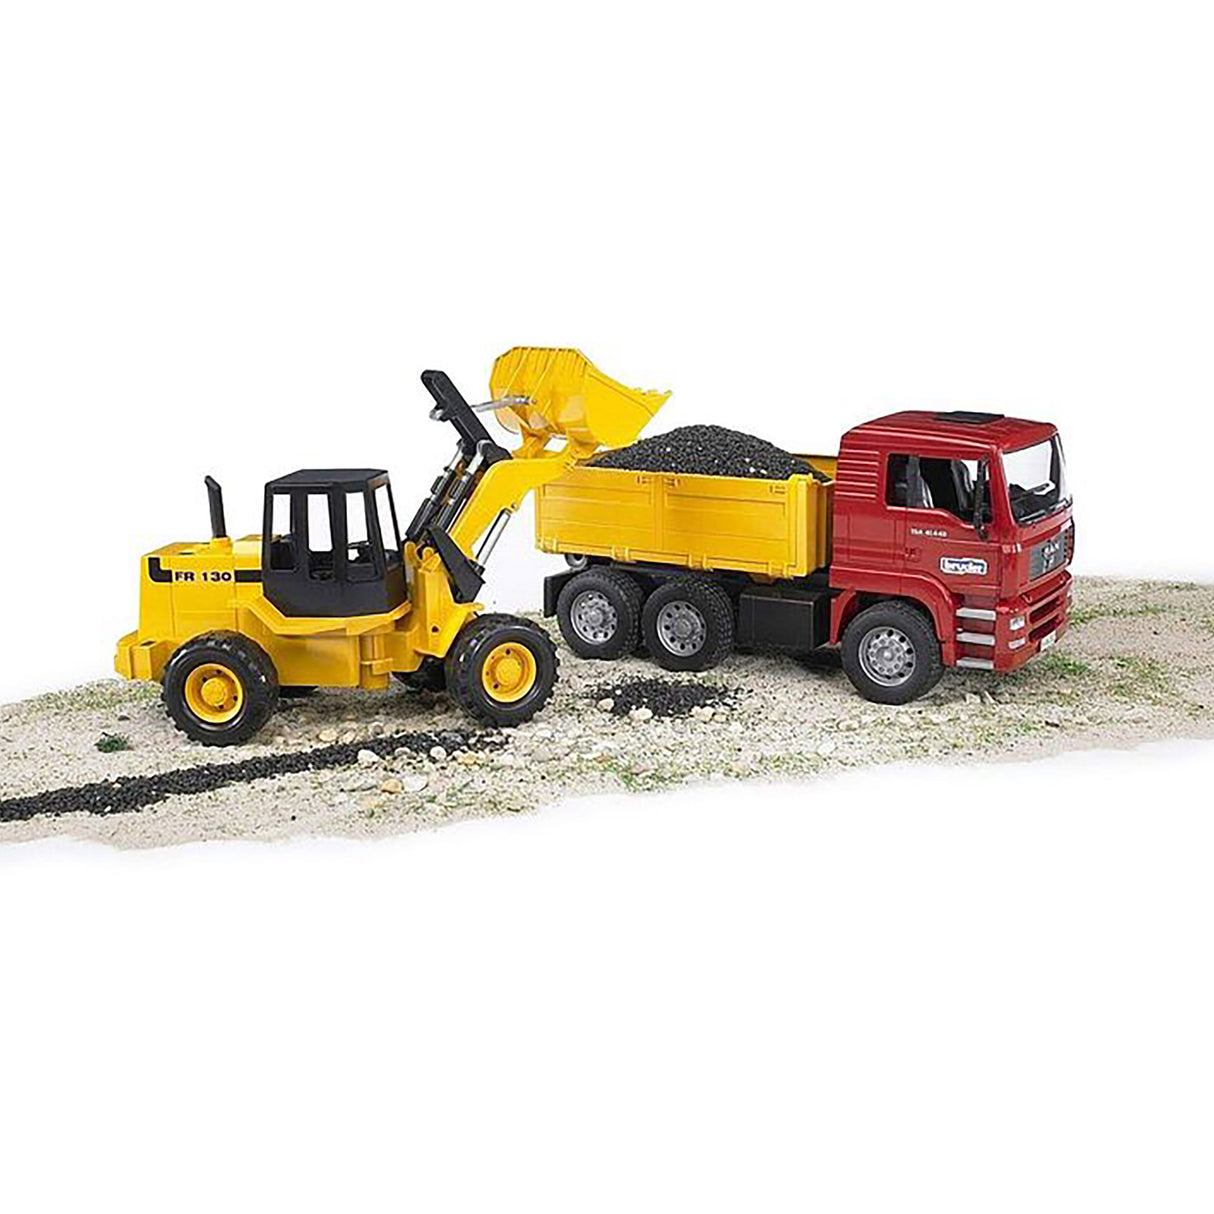 Bruder Construction Truck with Articulated Road Loader